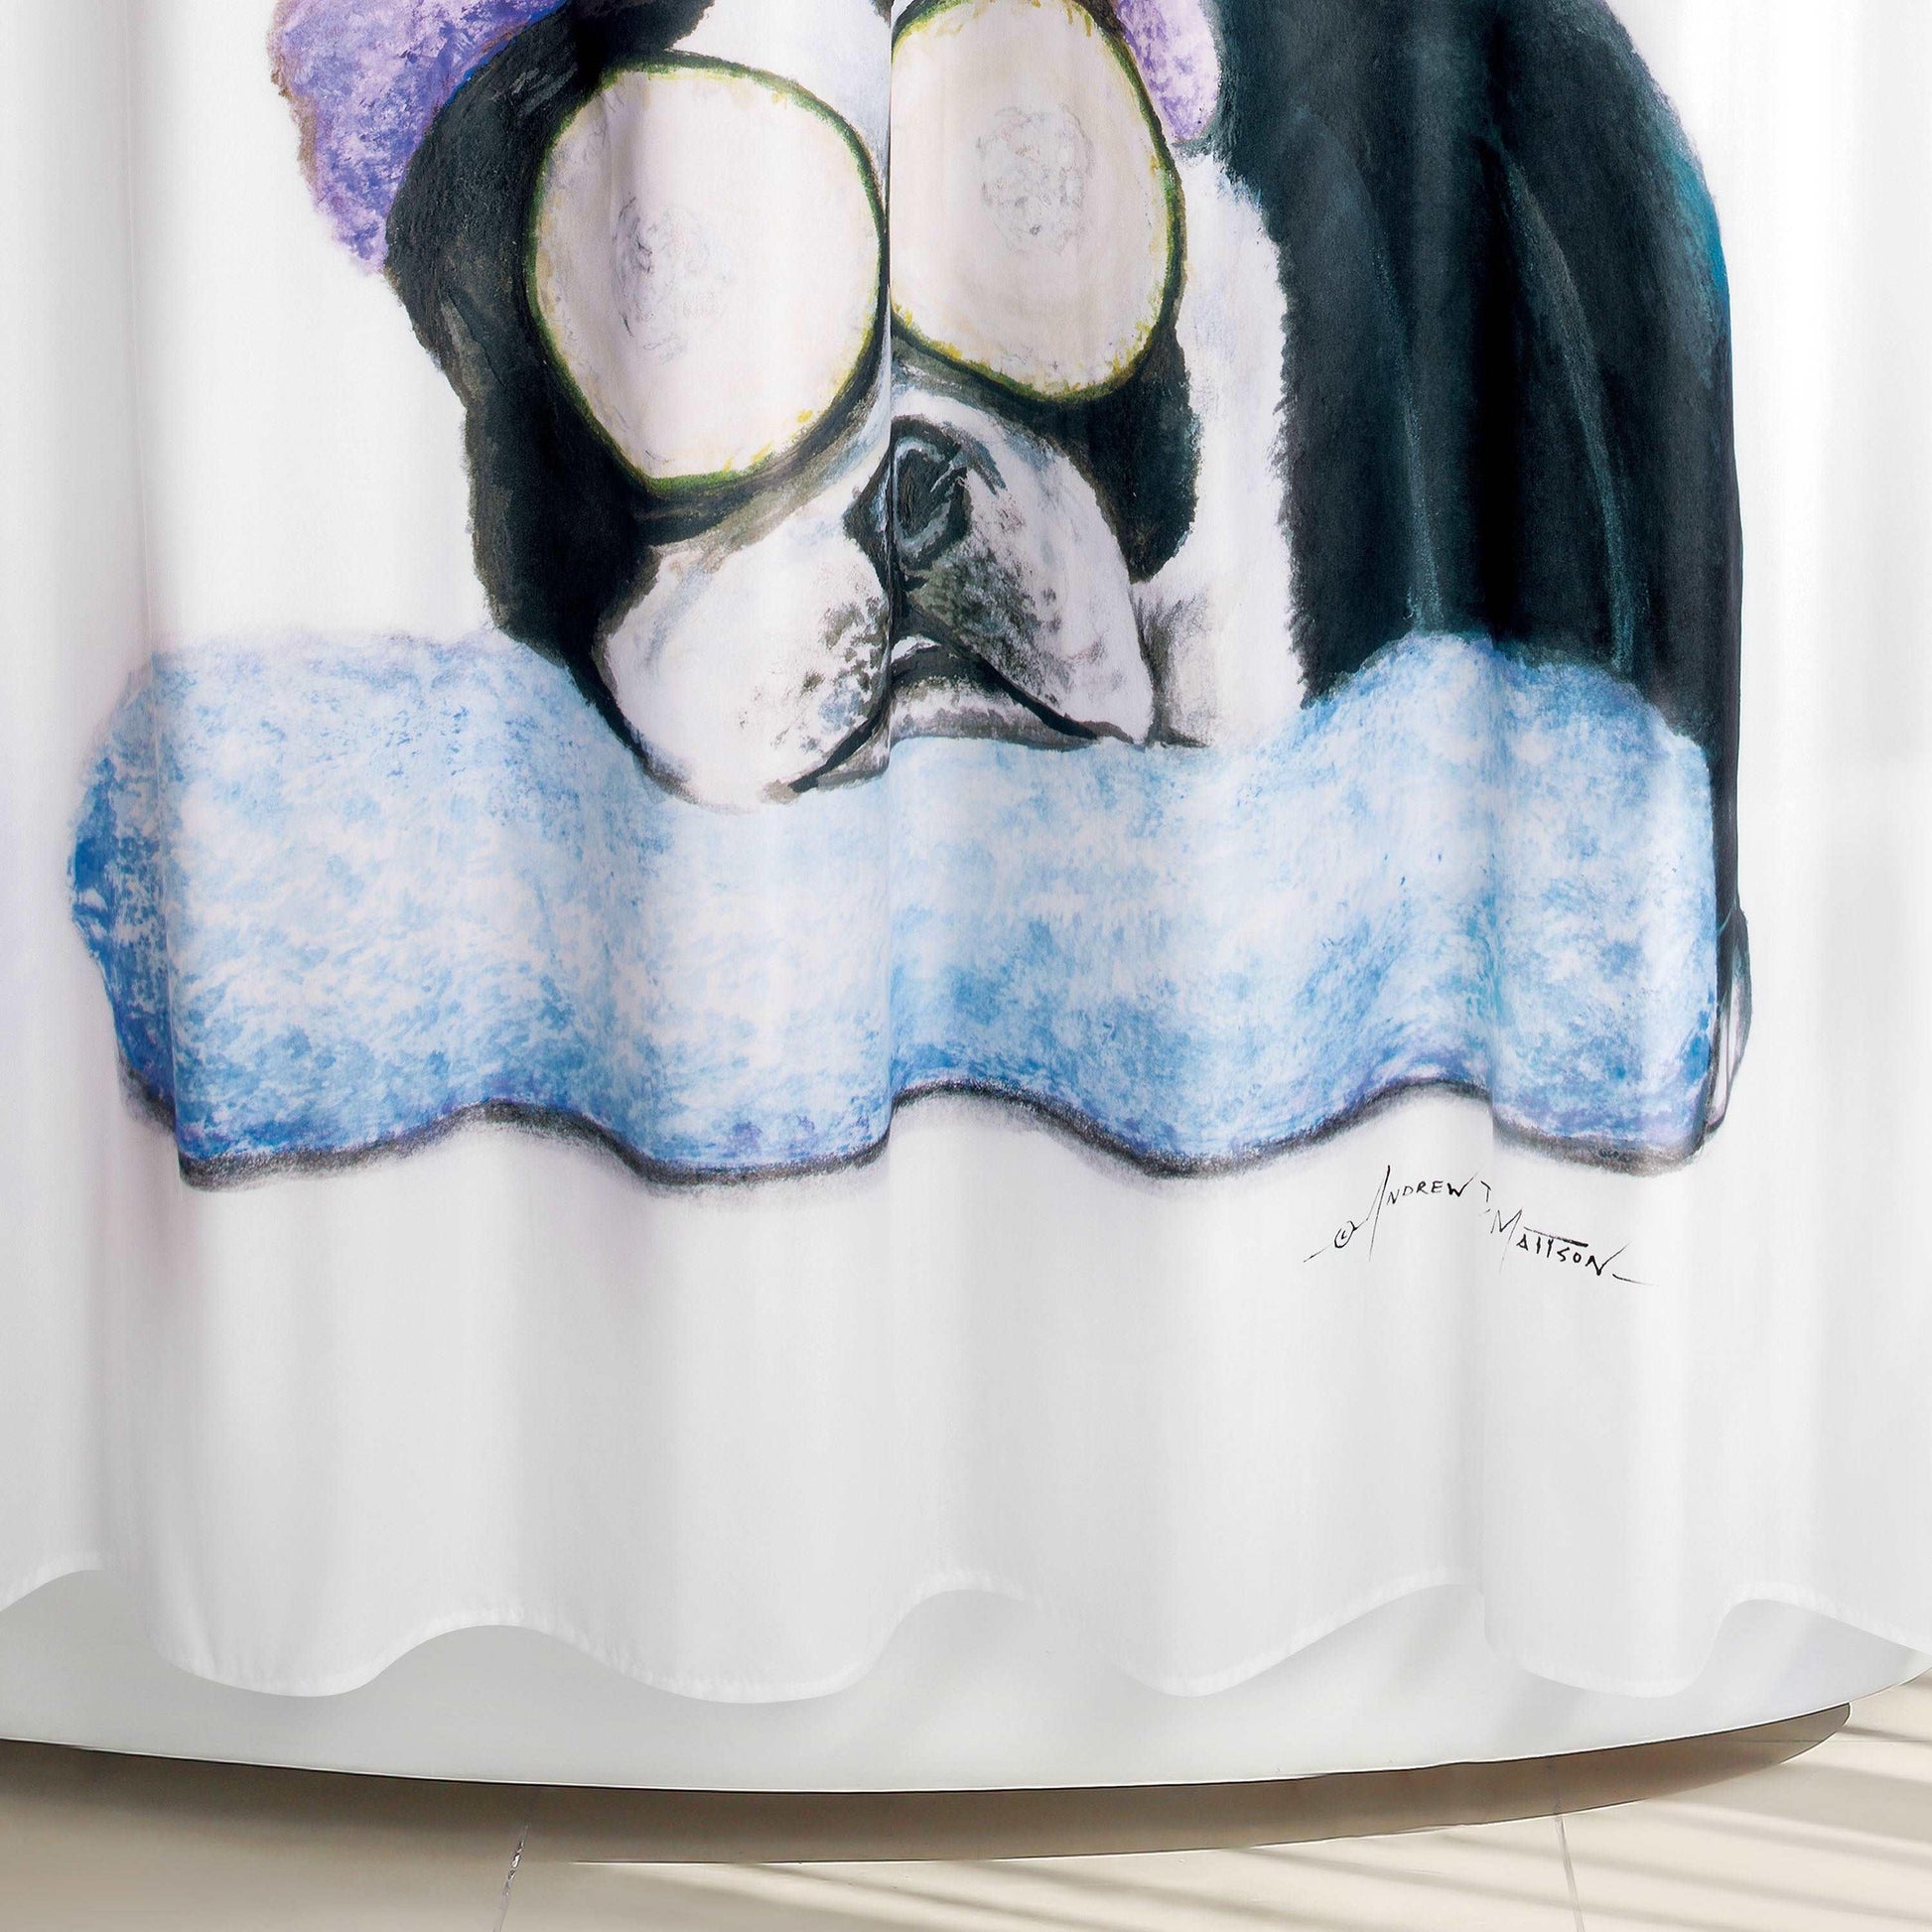 Frenchie Spa Shower Curtain - Allure Home Creation